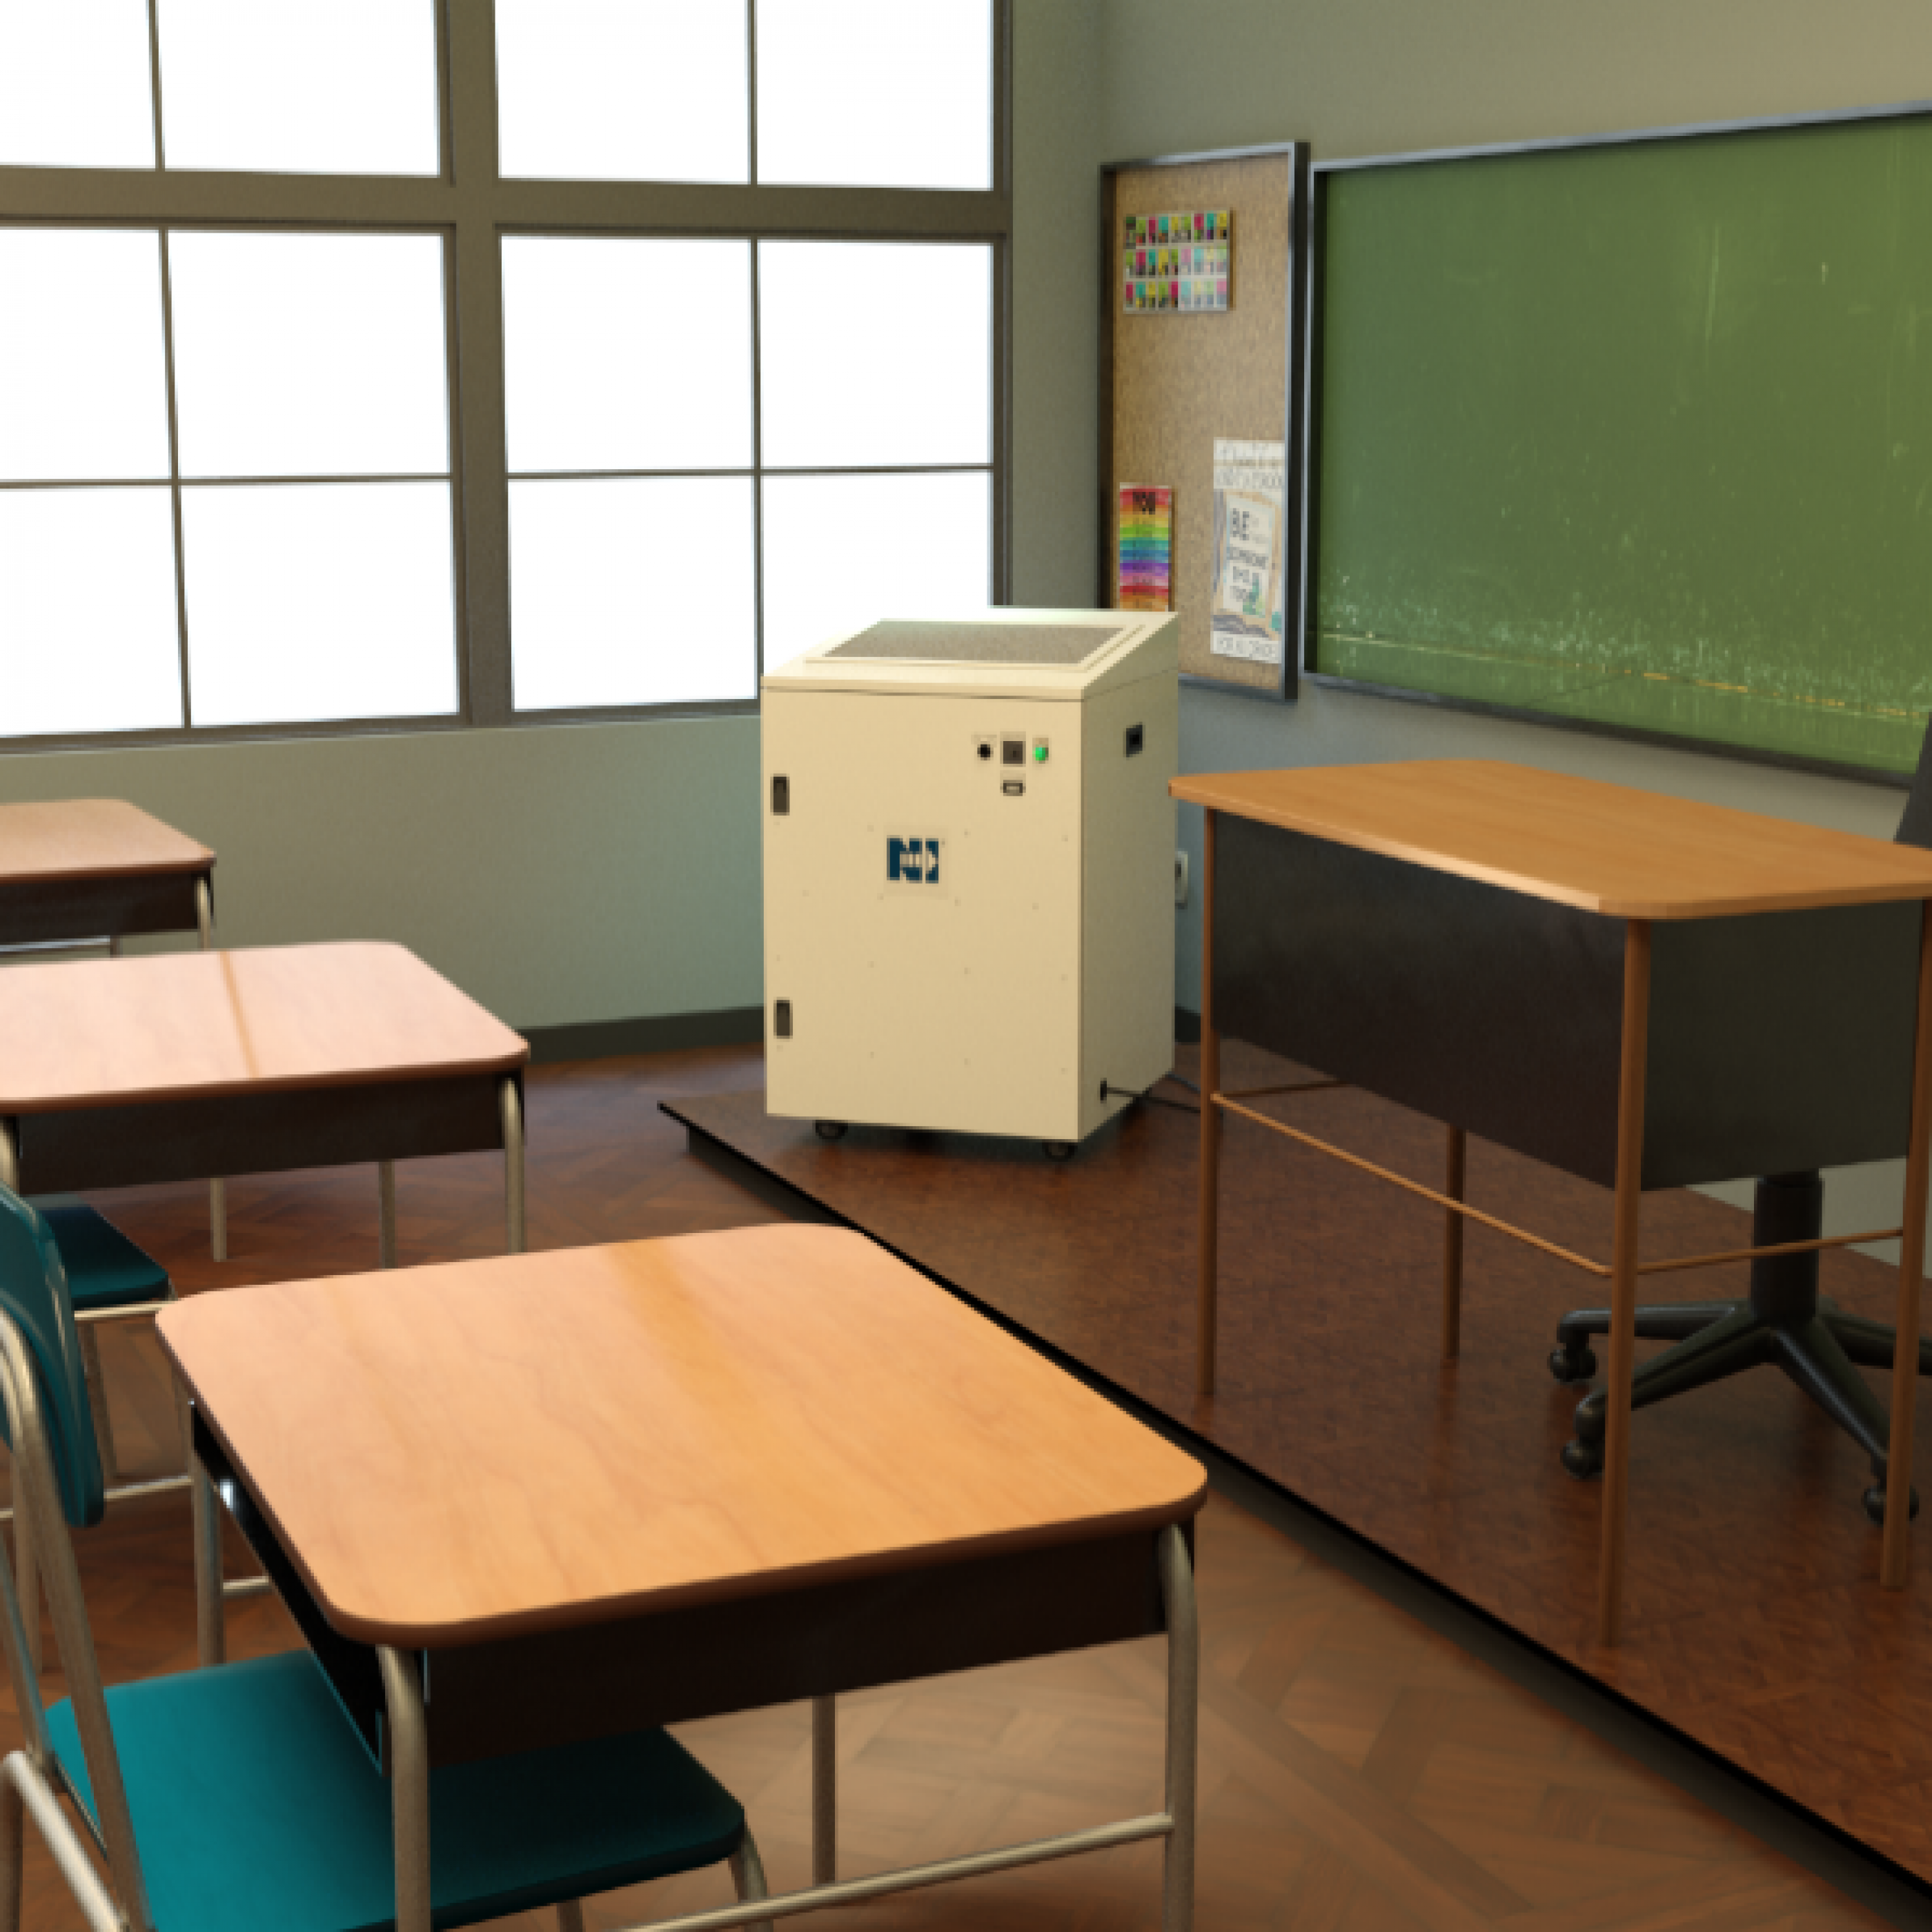 Nailor MAC 700 in idealized classroom setting